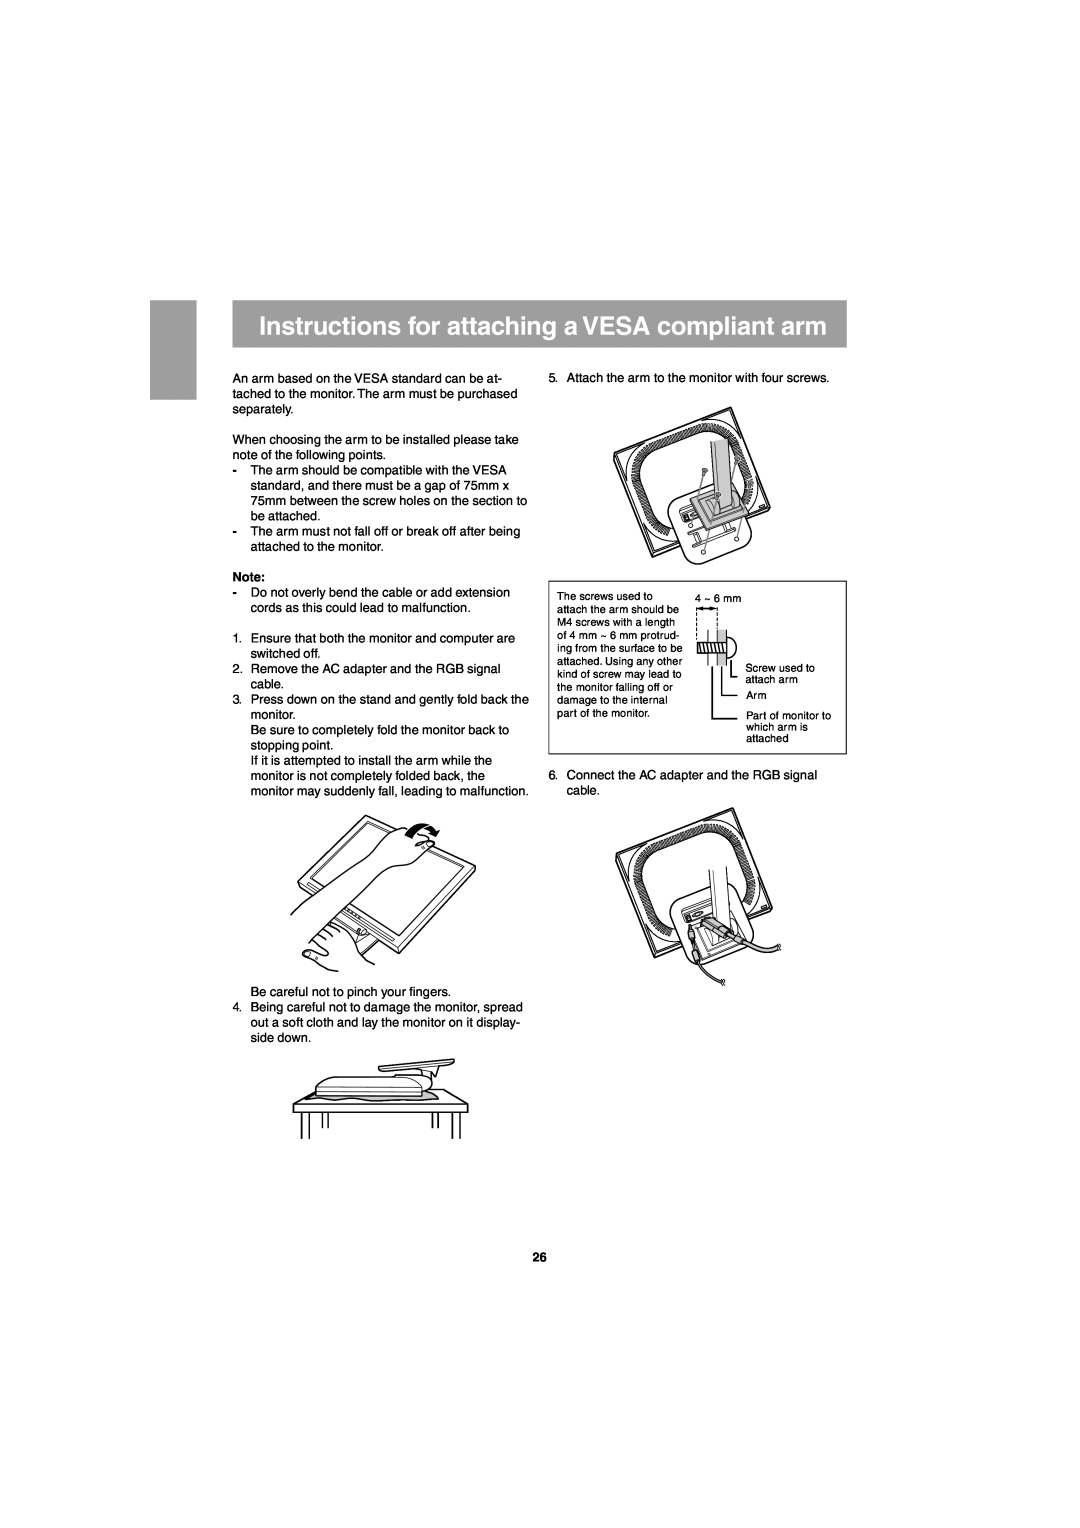 Sharp LL-T15G1, LL-E15G1 Instructions for attaching a VESA compliant arm, 4 ~ 6 mm Screw used to attach arm Arm 